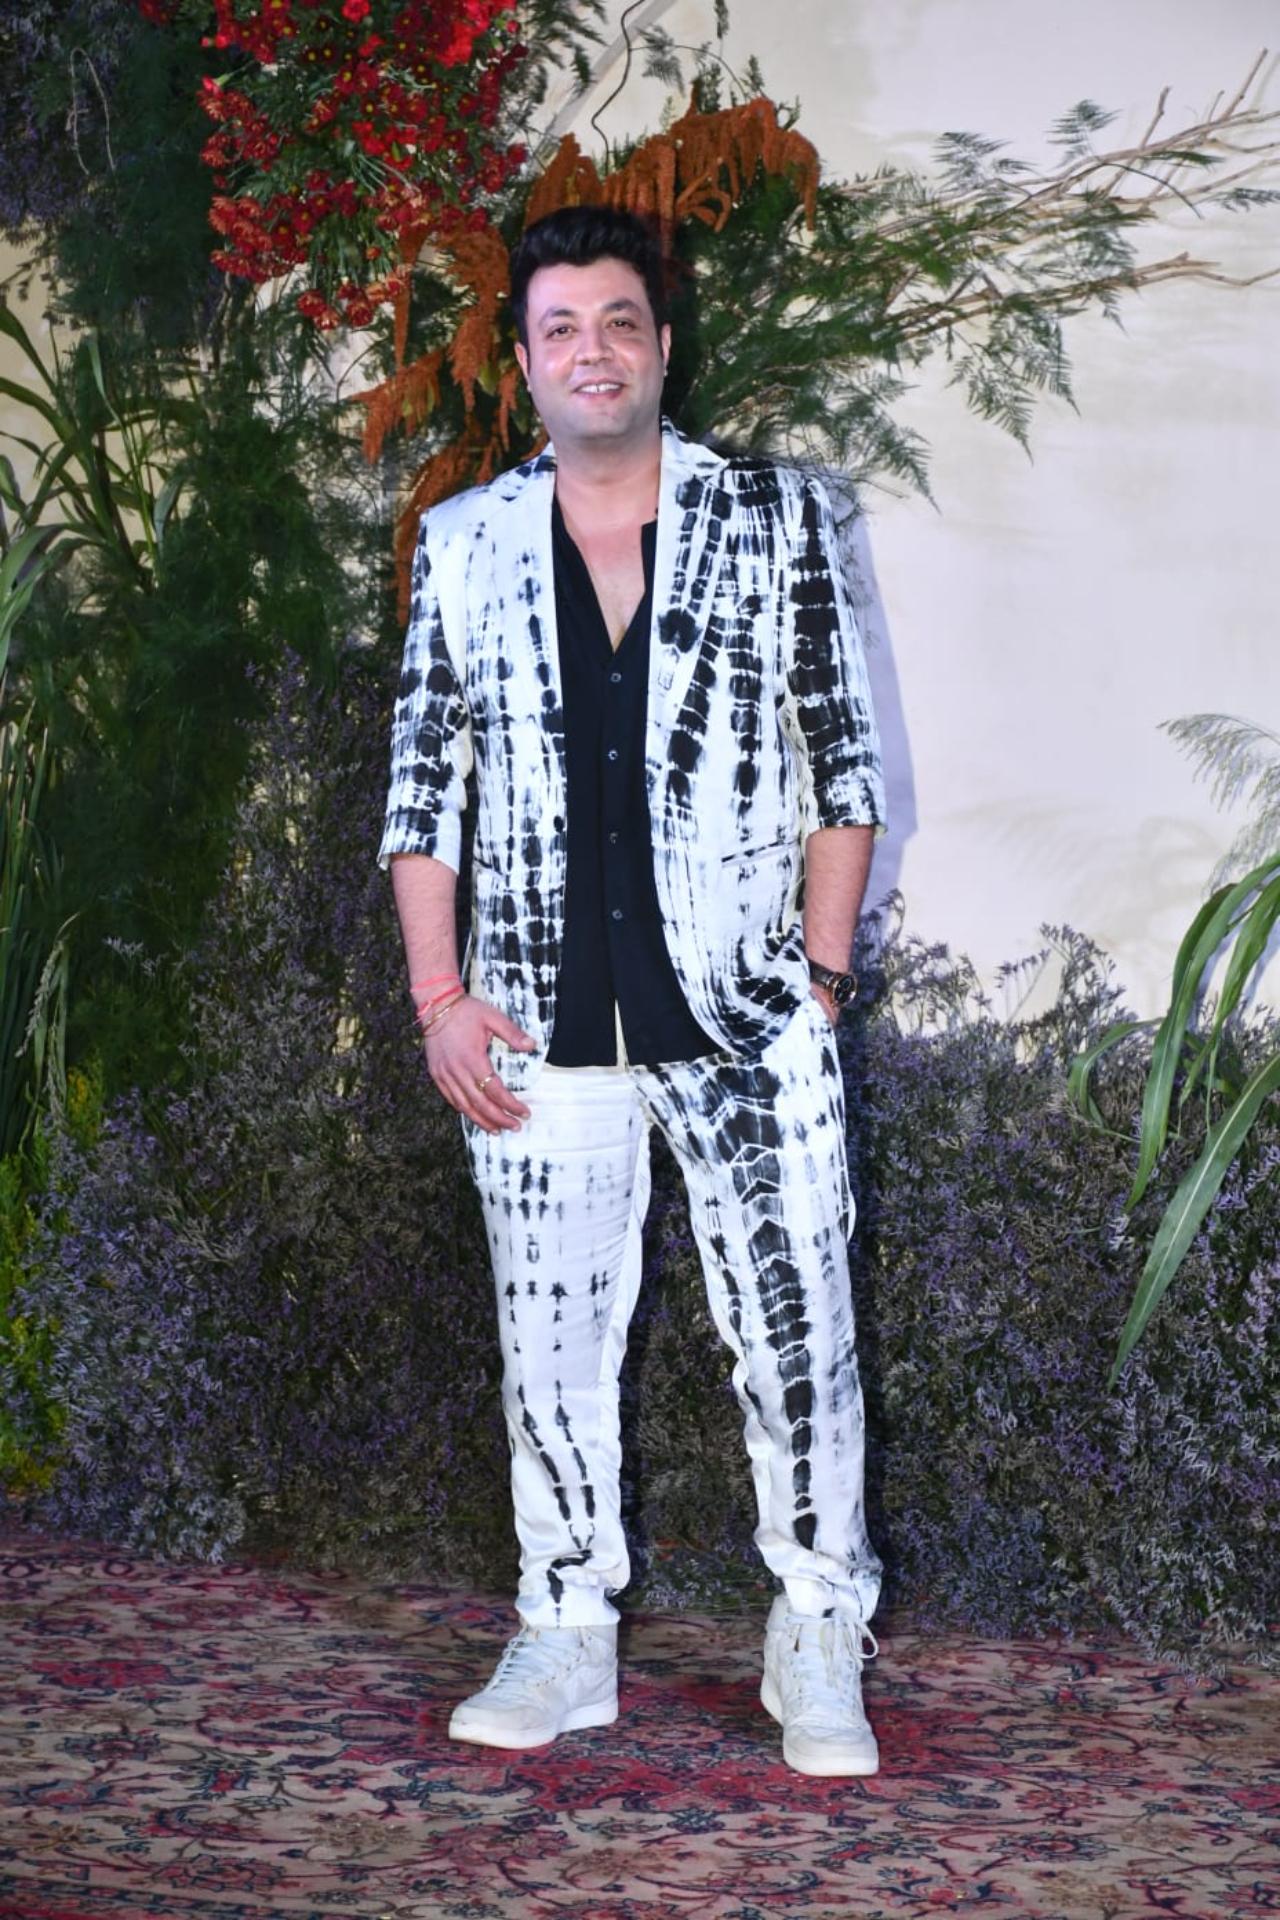 Varun Sharma, who has worked with Ali and Richa in the 'Fukrey' franchise made a solo entry. He was seen in a white and black tie dye suit